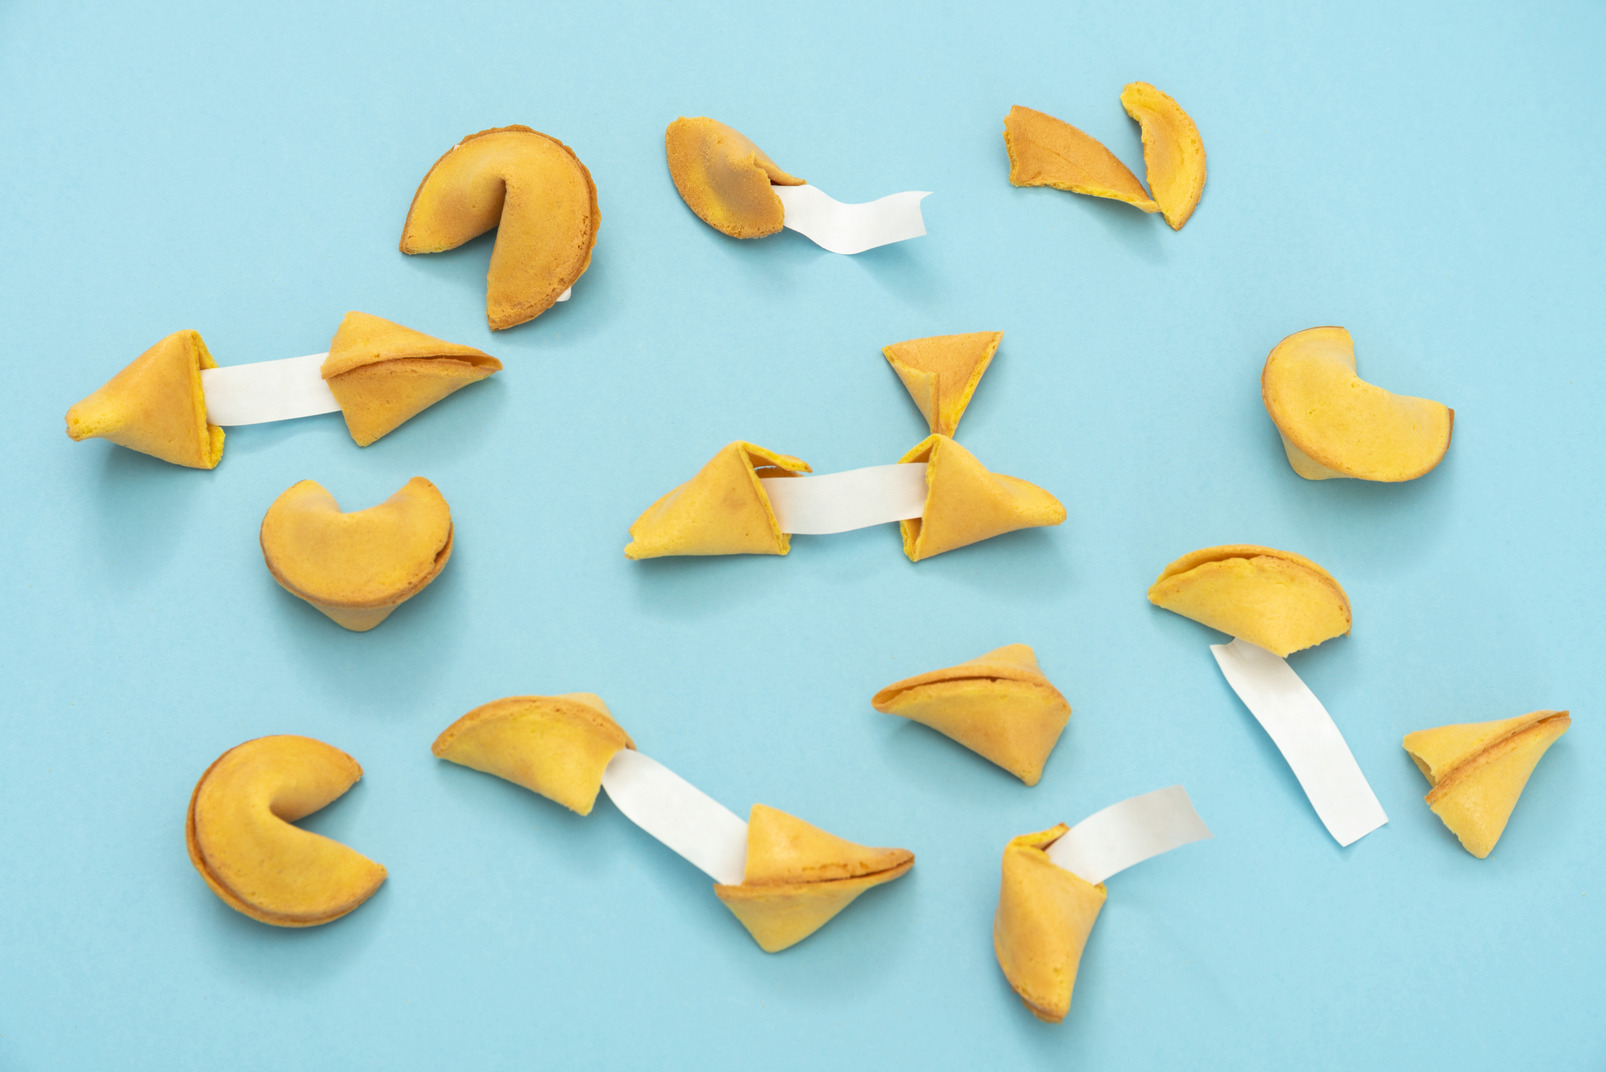 Top your meal off with a fortune cookie